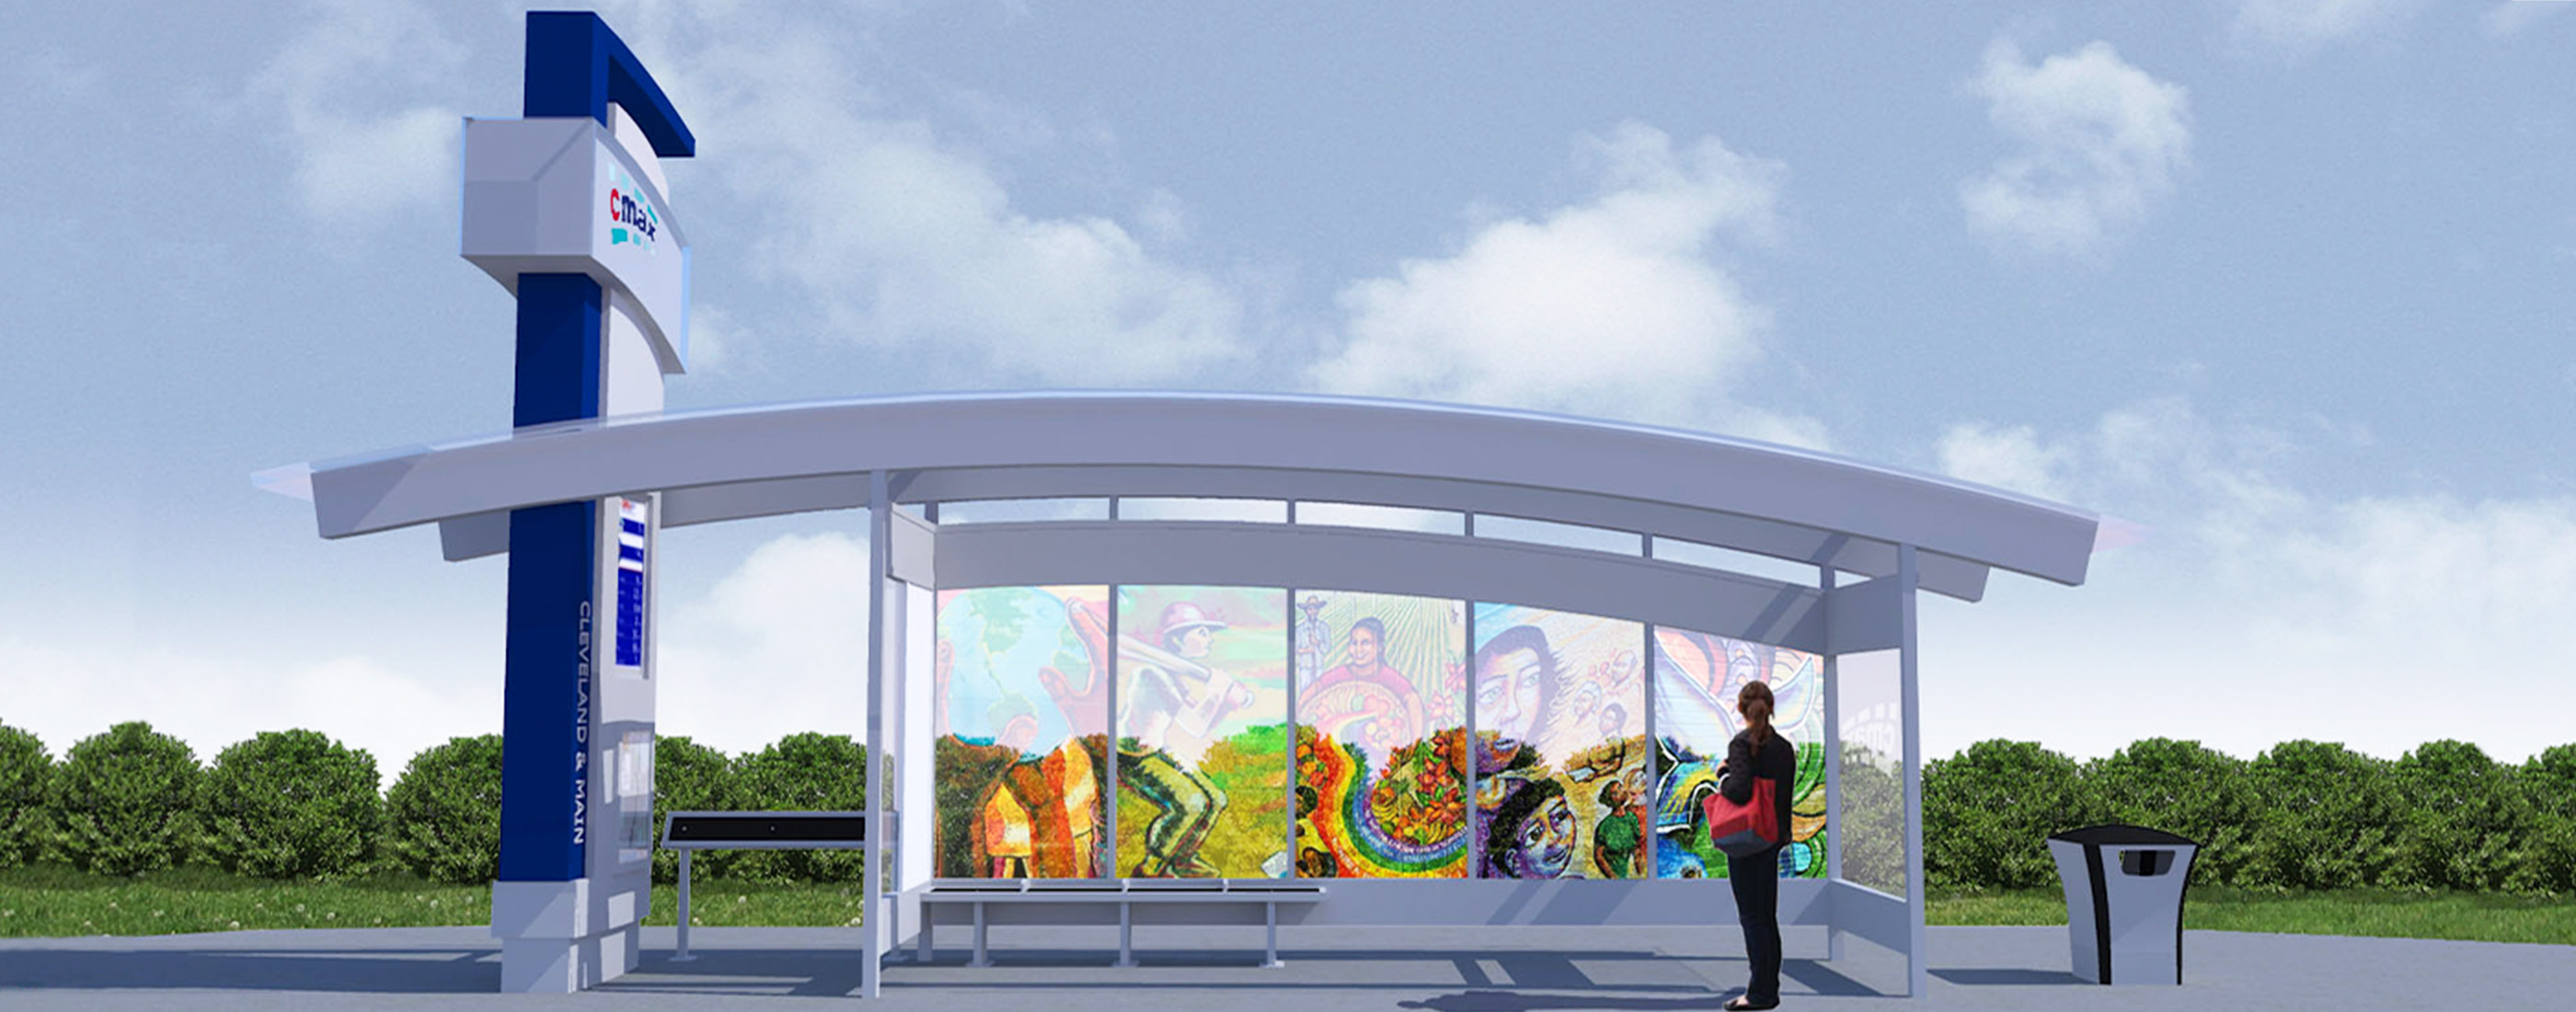 A rendering of local artwork at one of the CMAX stations.